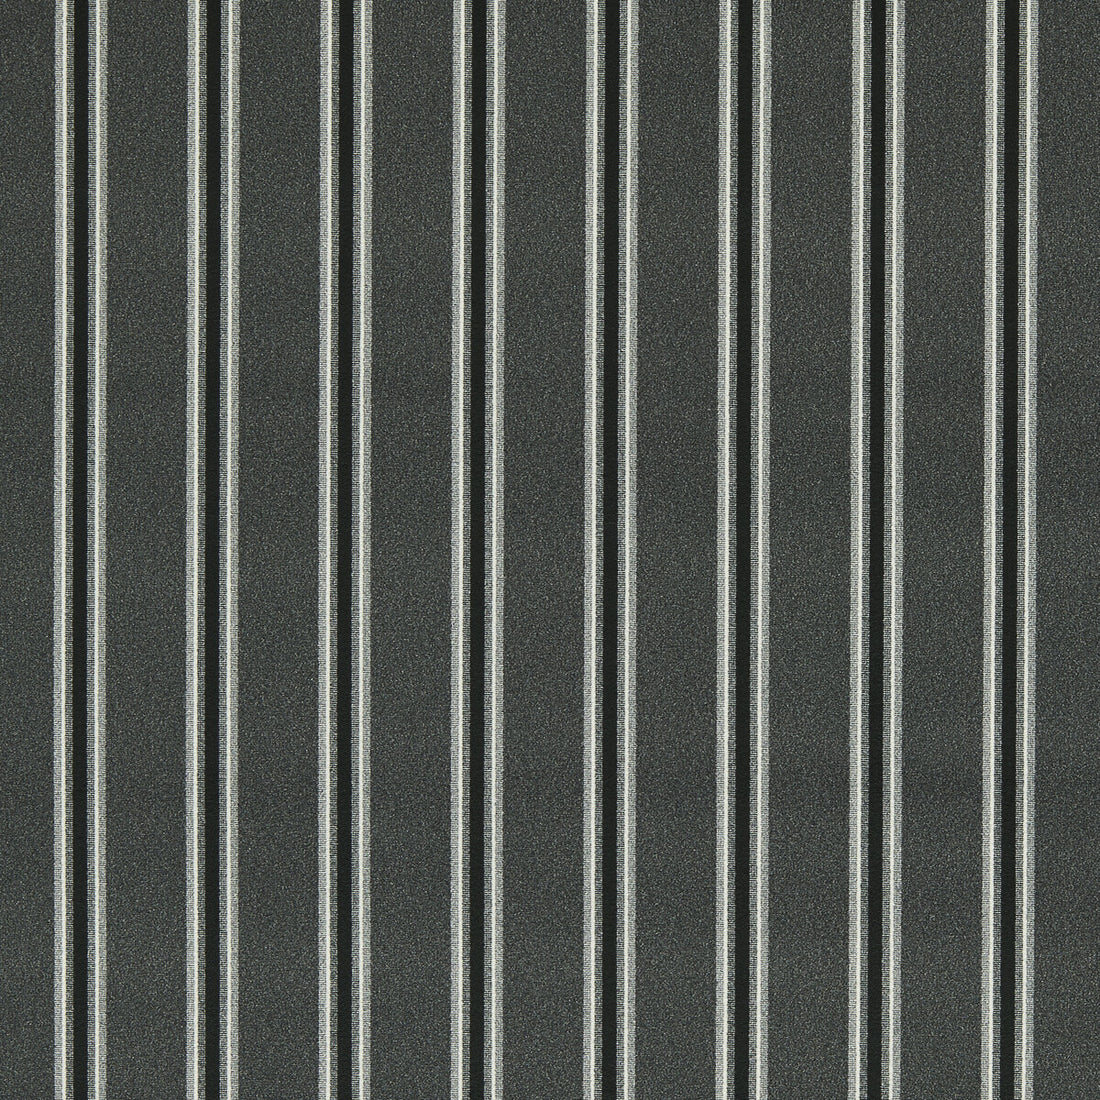 Bowfell fabric in ebony color - pattern F1689/03.CAC.0 - by Clarke And Clarke in the Whitworth collection